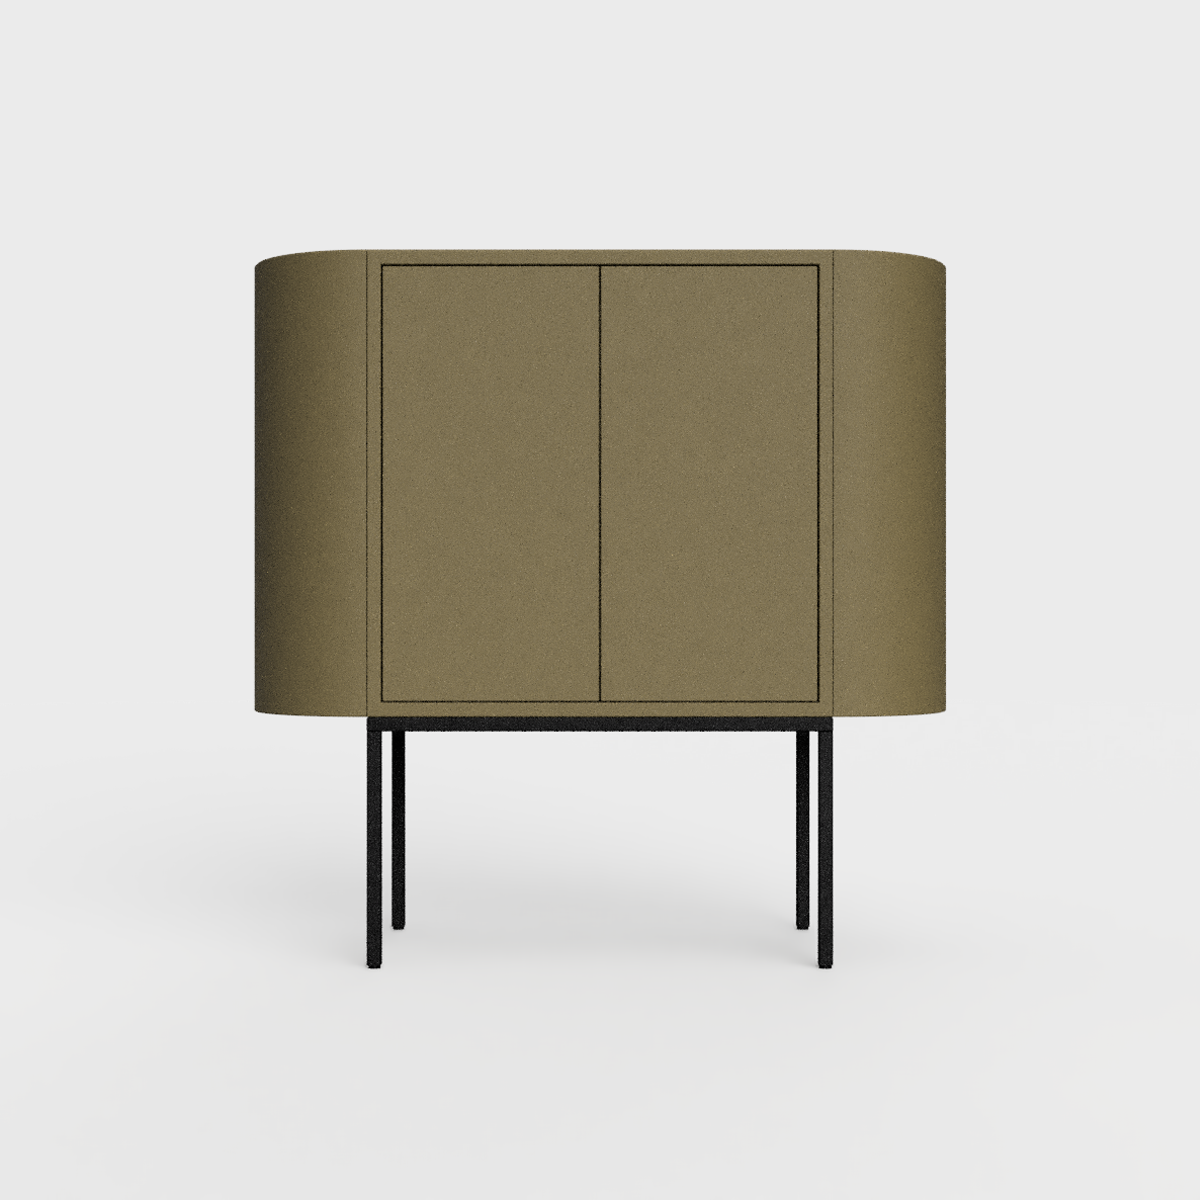 Siena 01 Sideboard in Brown Olive color, powder-coated steel, elegant and modern piece of furniture for your living room